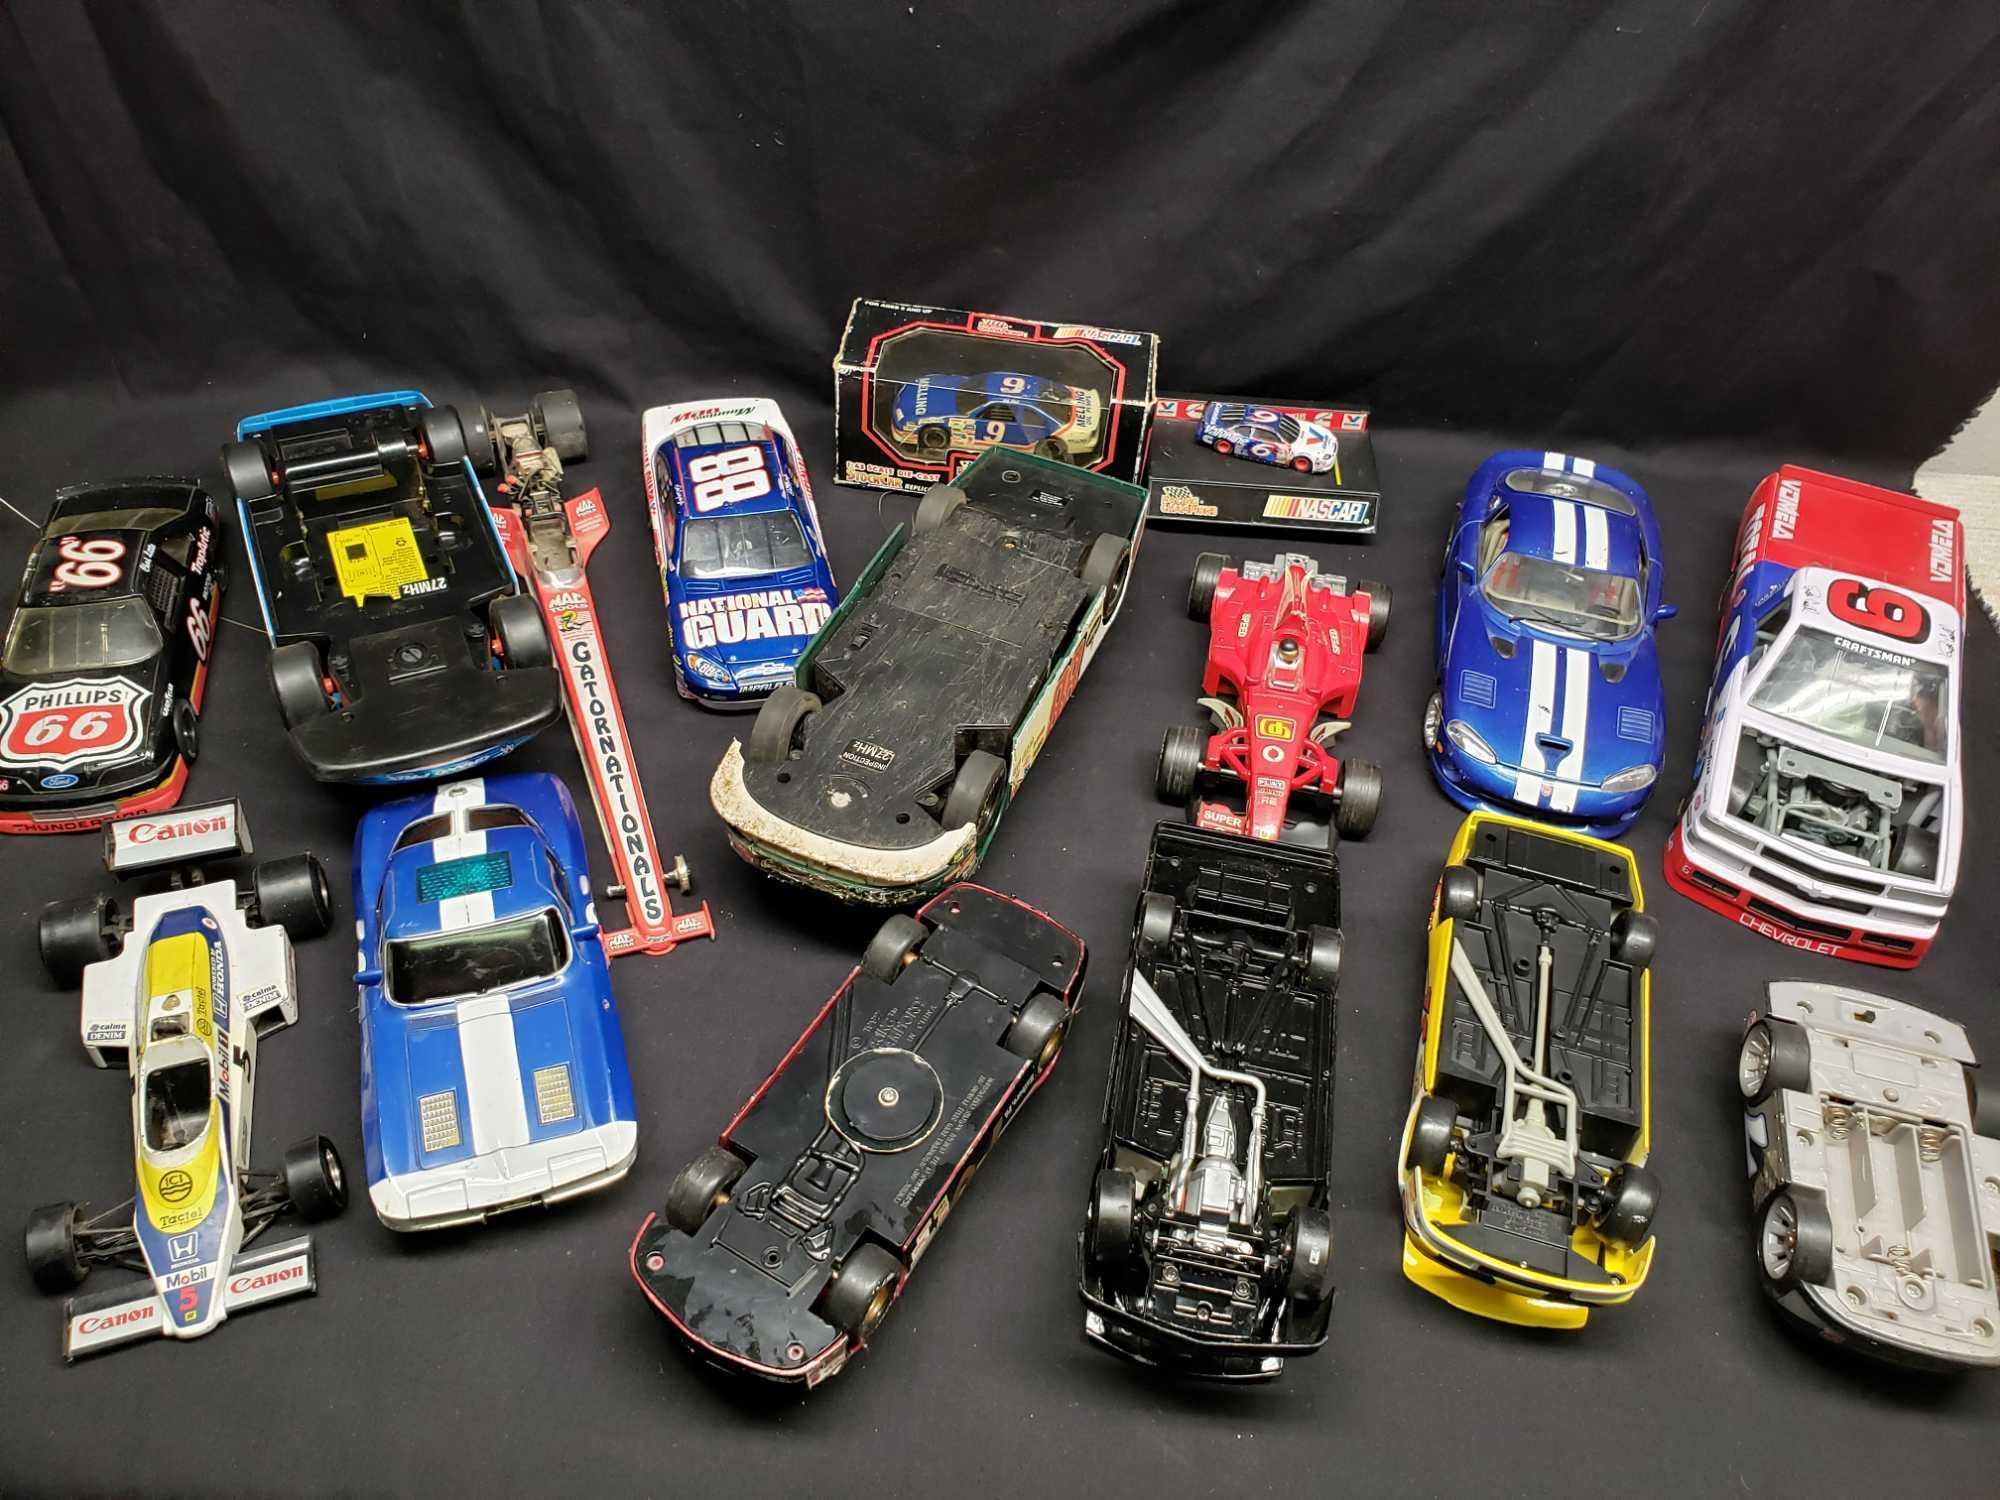 Mixed lot of Vintage used Racecars. Hot Wheels, Mobile